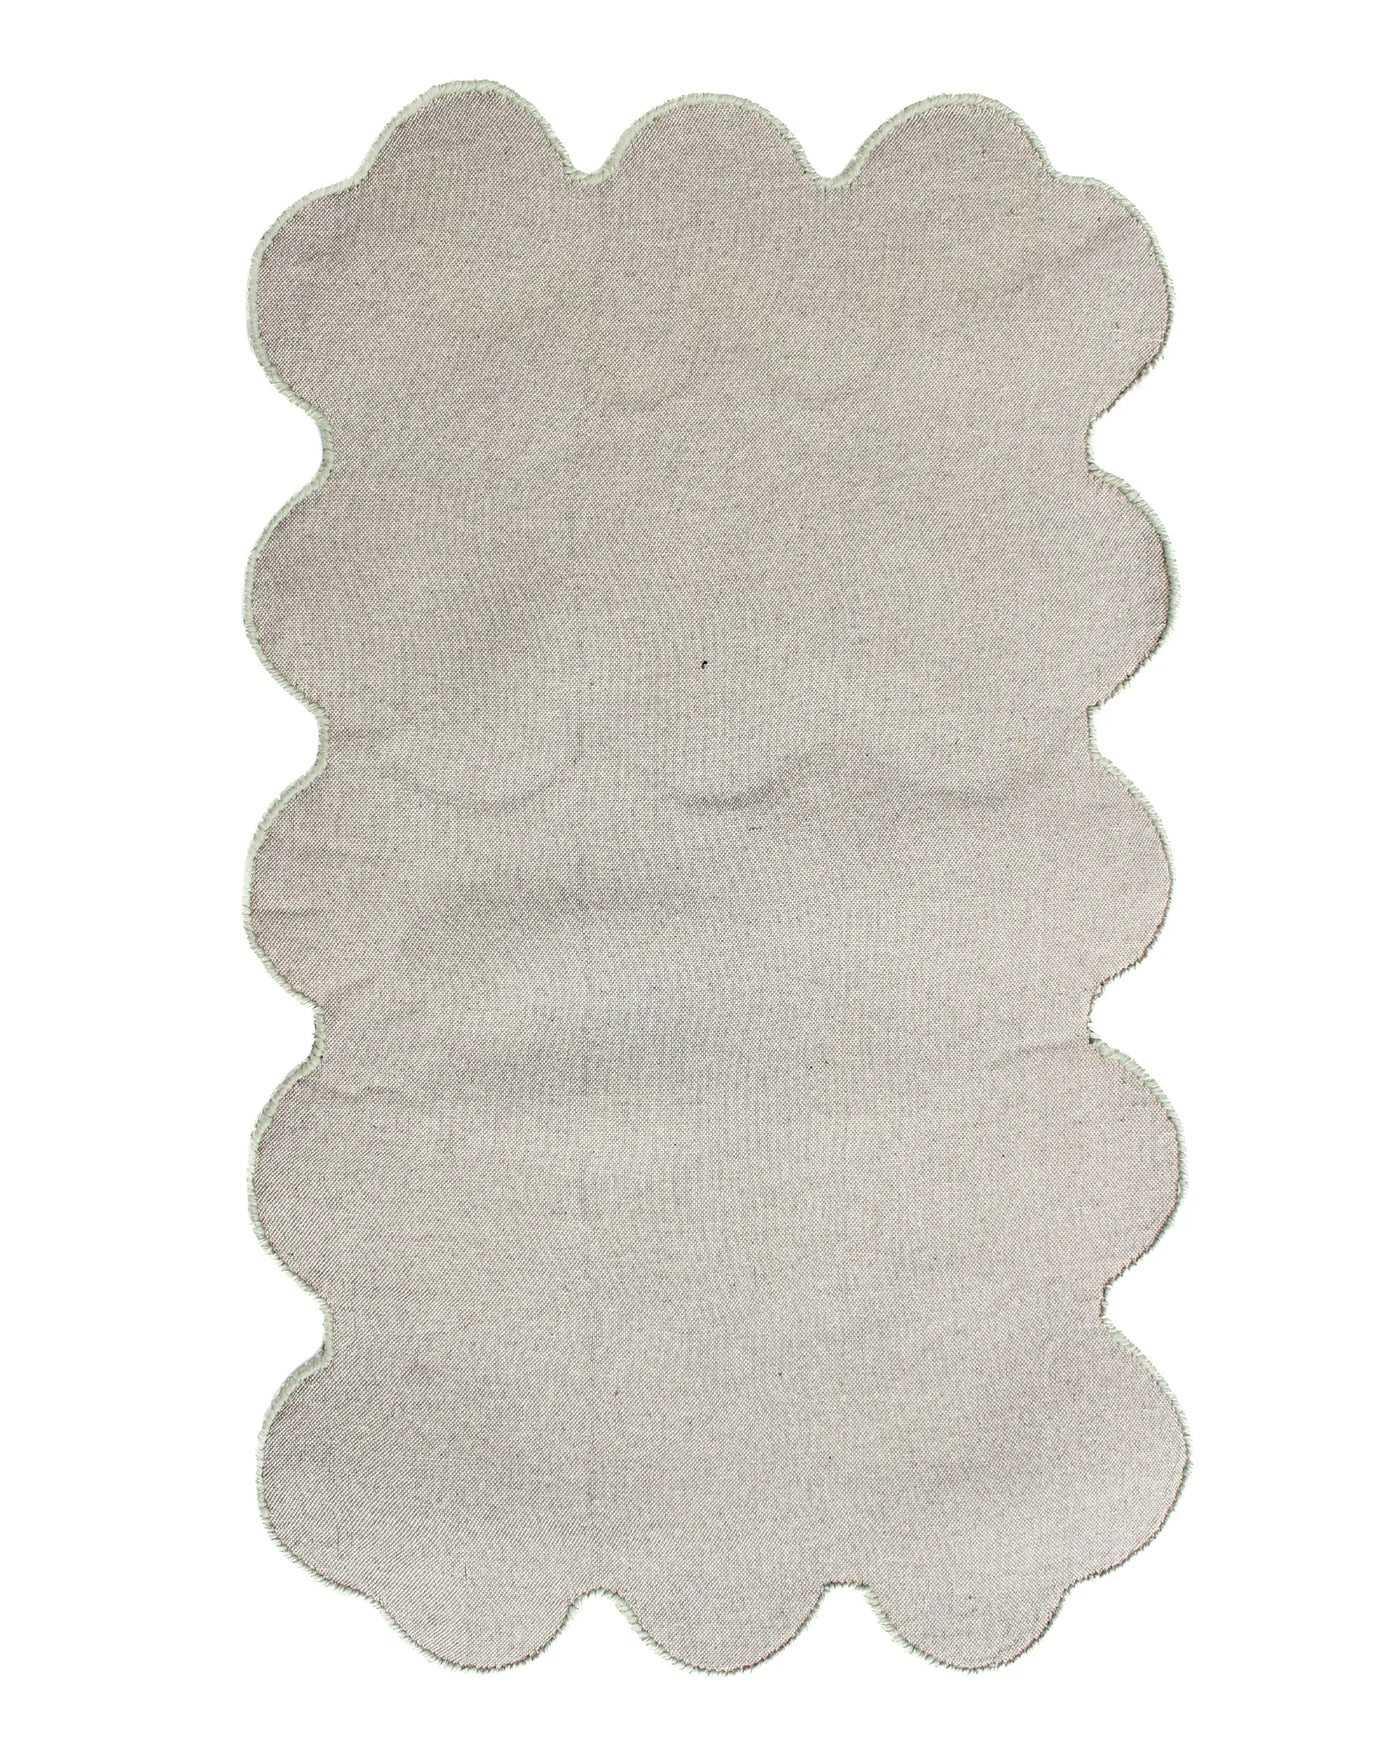 Back view showing the finishing around the unique sculpted edges of the Sculpted Edge Hand Tufted Wool Rug